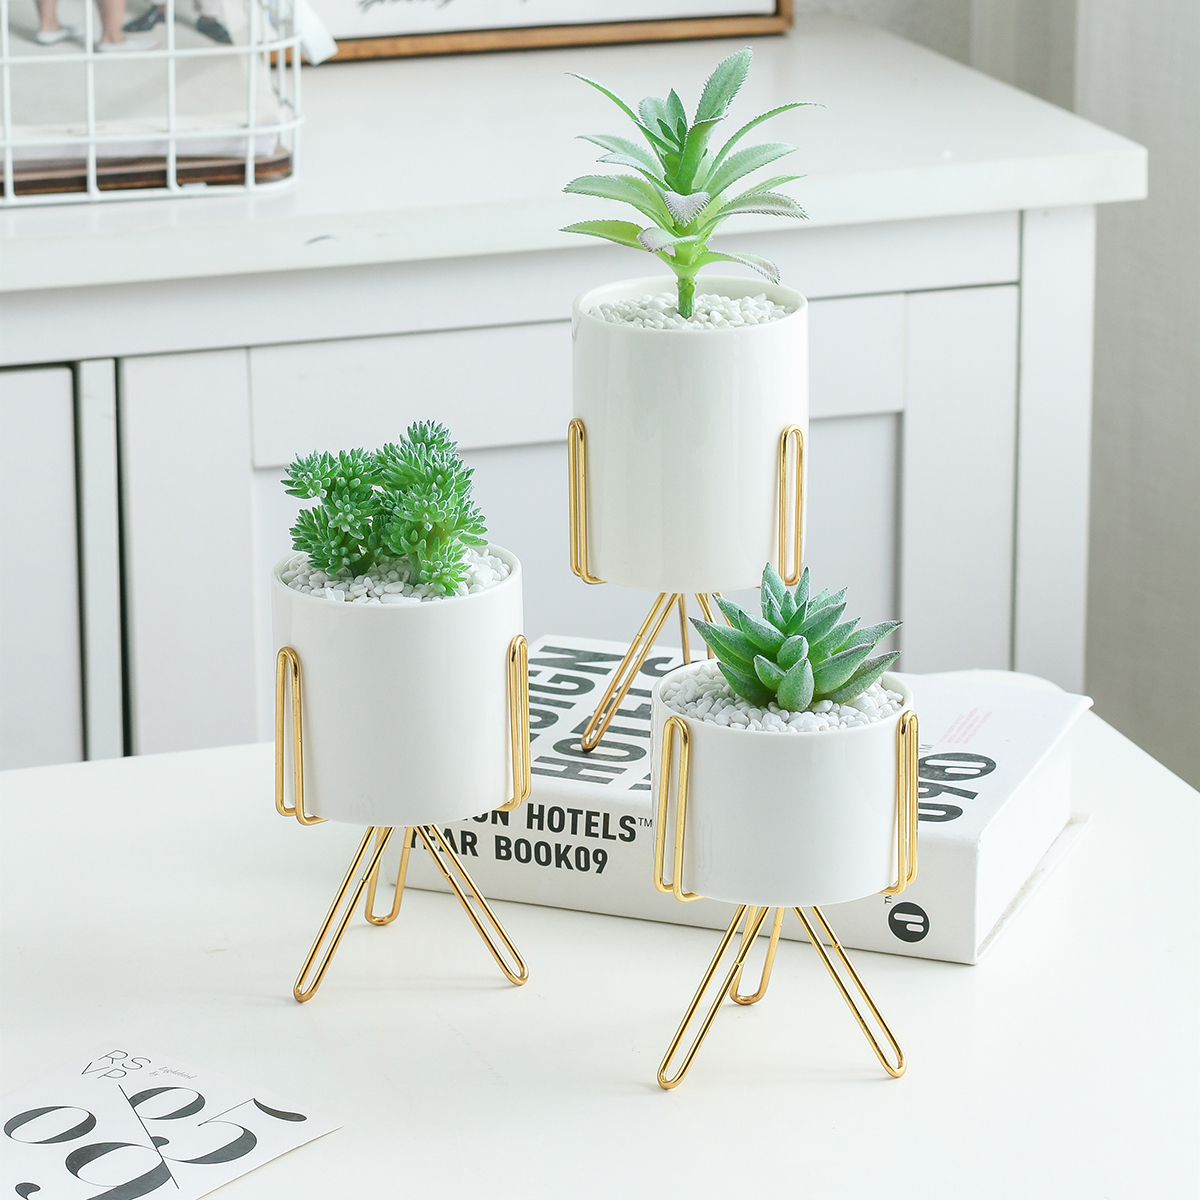 Find Iron Wire Metal Rack Ceramic Succulent Plant Flower Pot Cactus Holder Home Office Desktop Decor for Sale on Gipsybee.com with cryptocurrencies